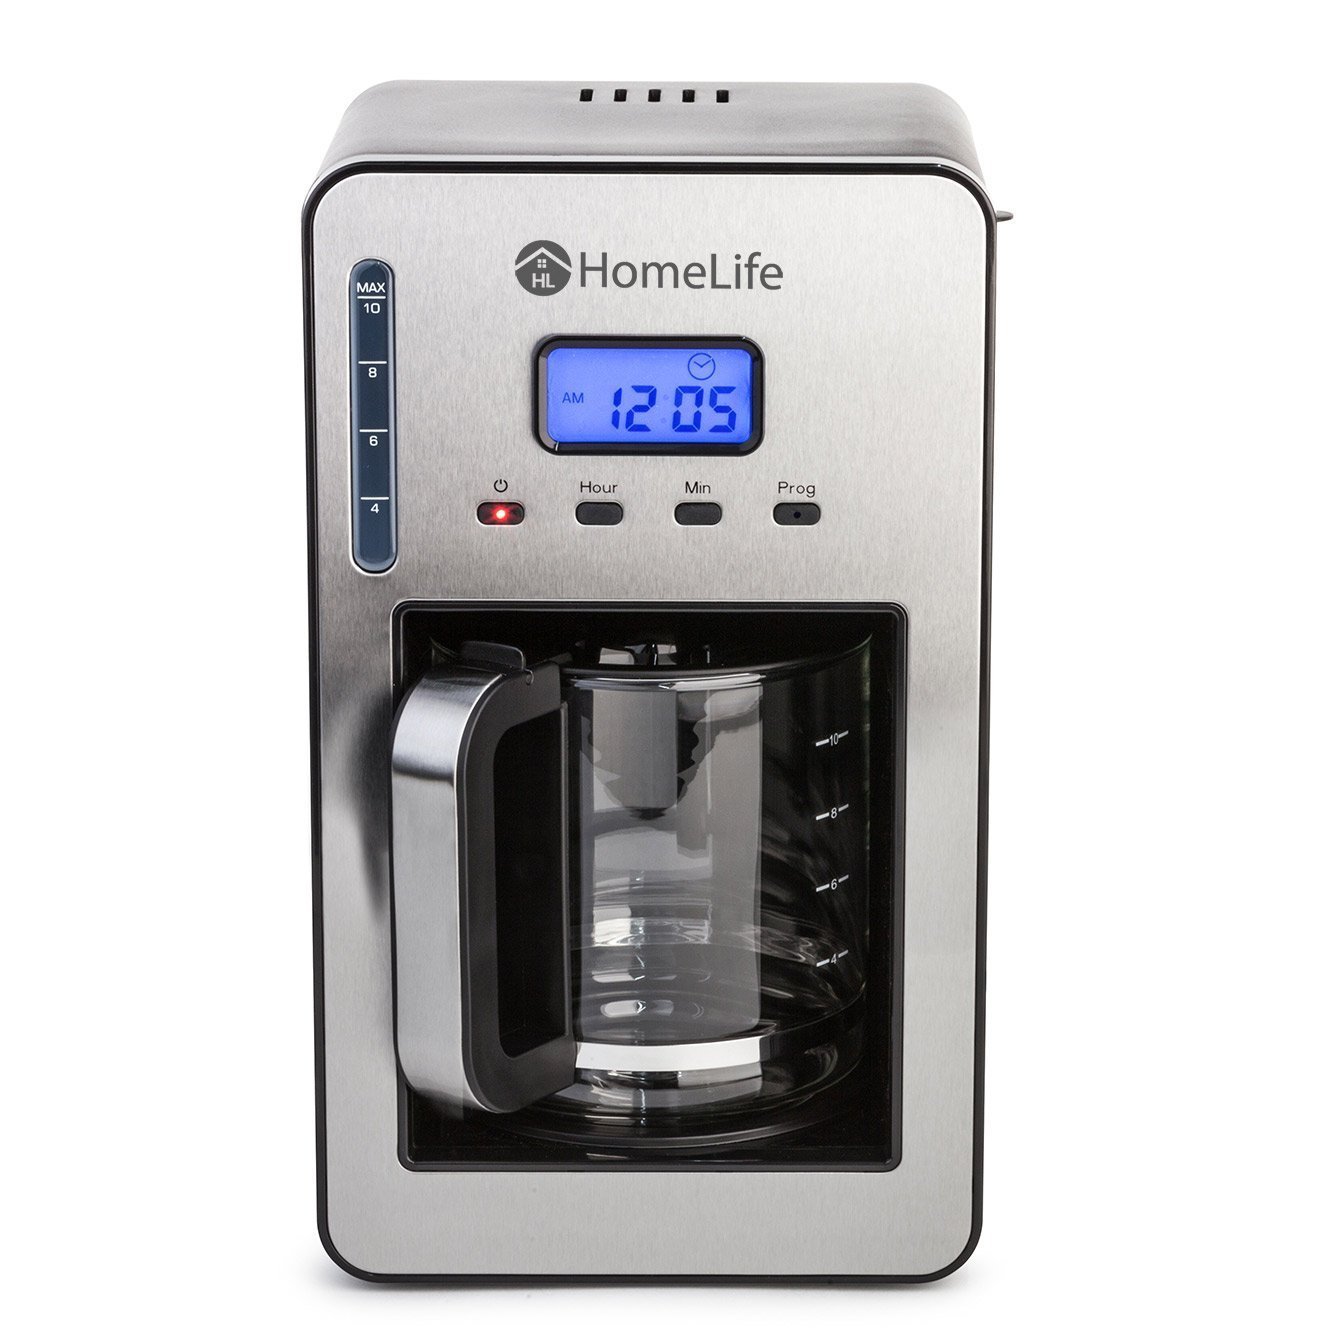 HomeLife Programmable 12-cup Coffee Maker